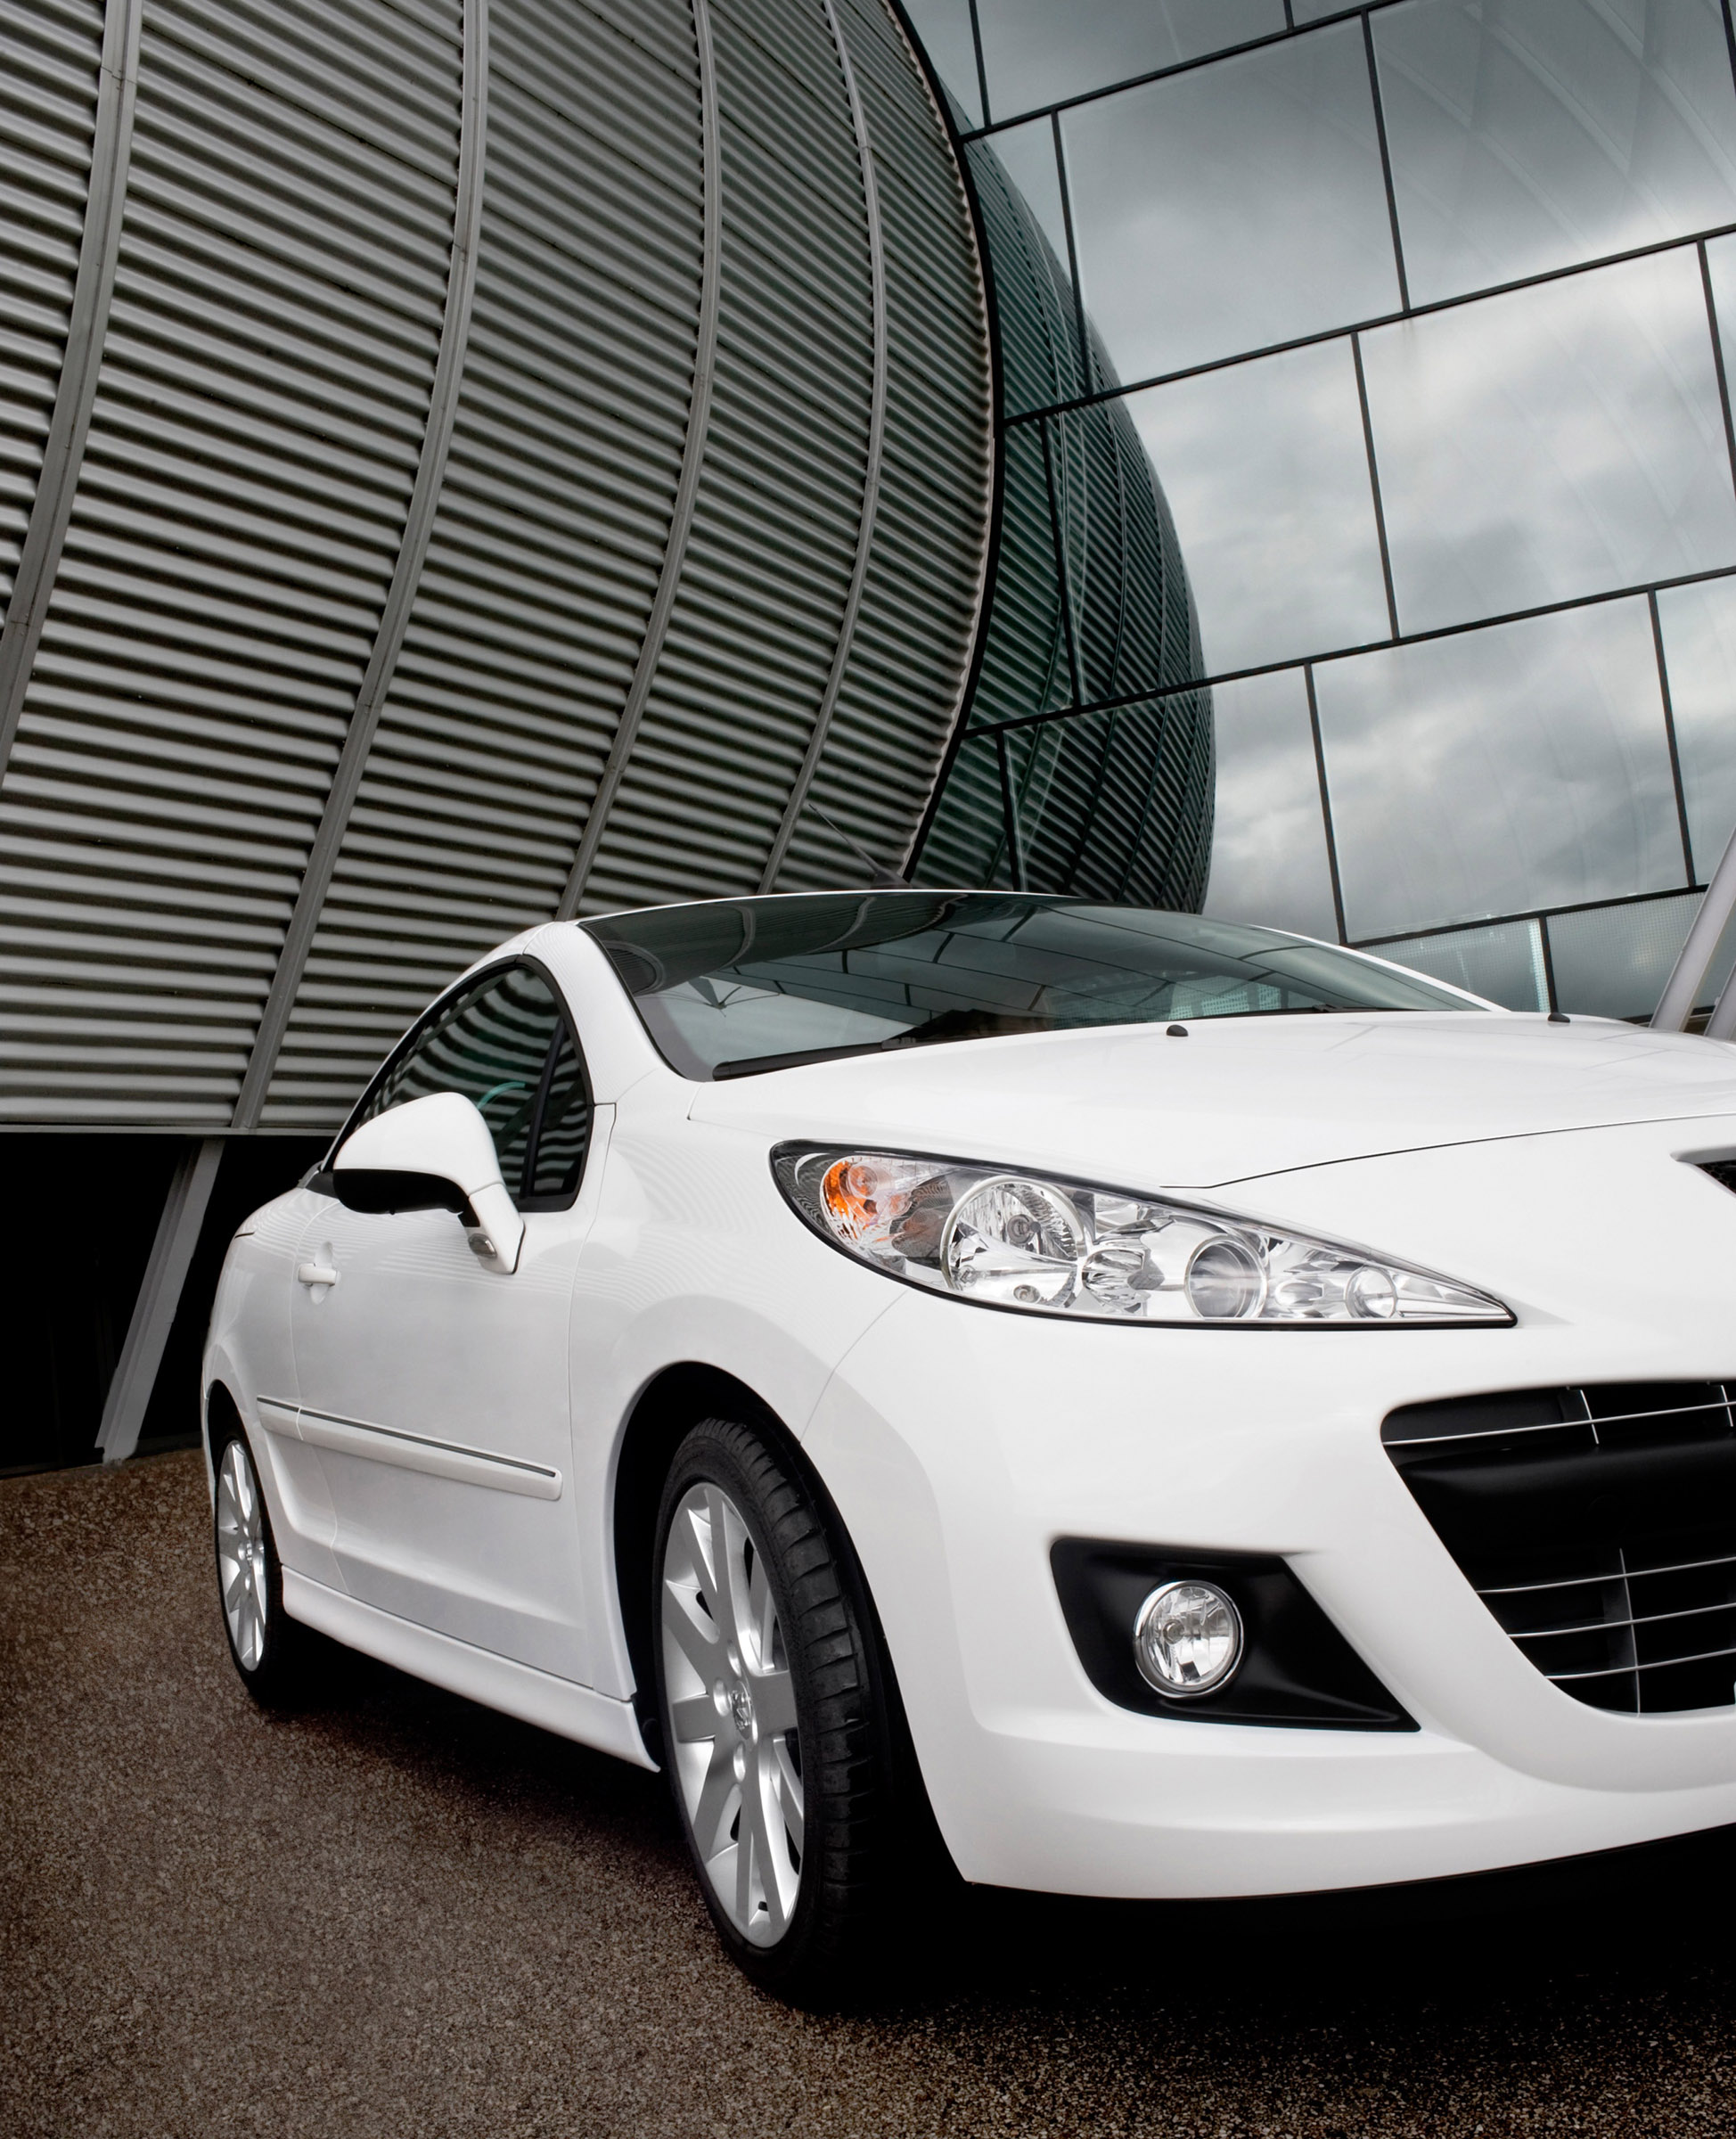 Peugeot 207 CC Restyled